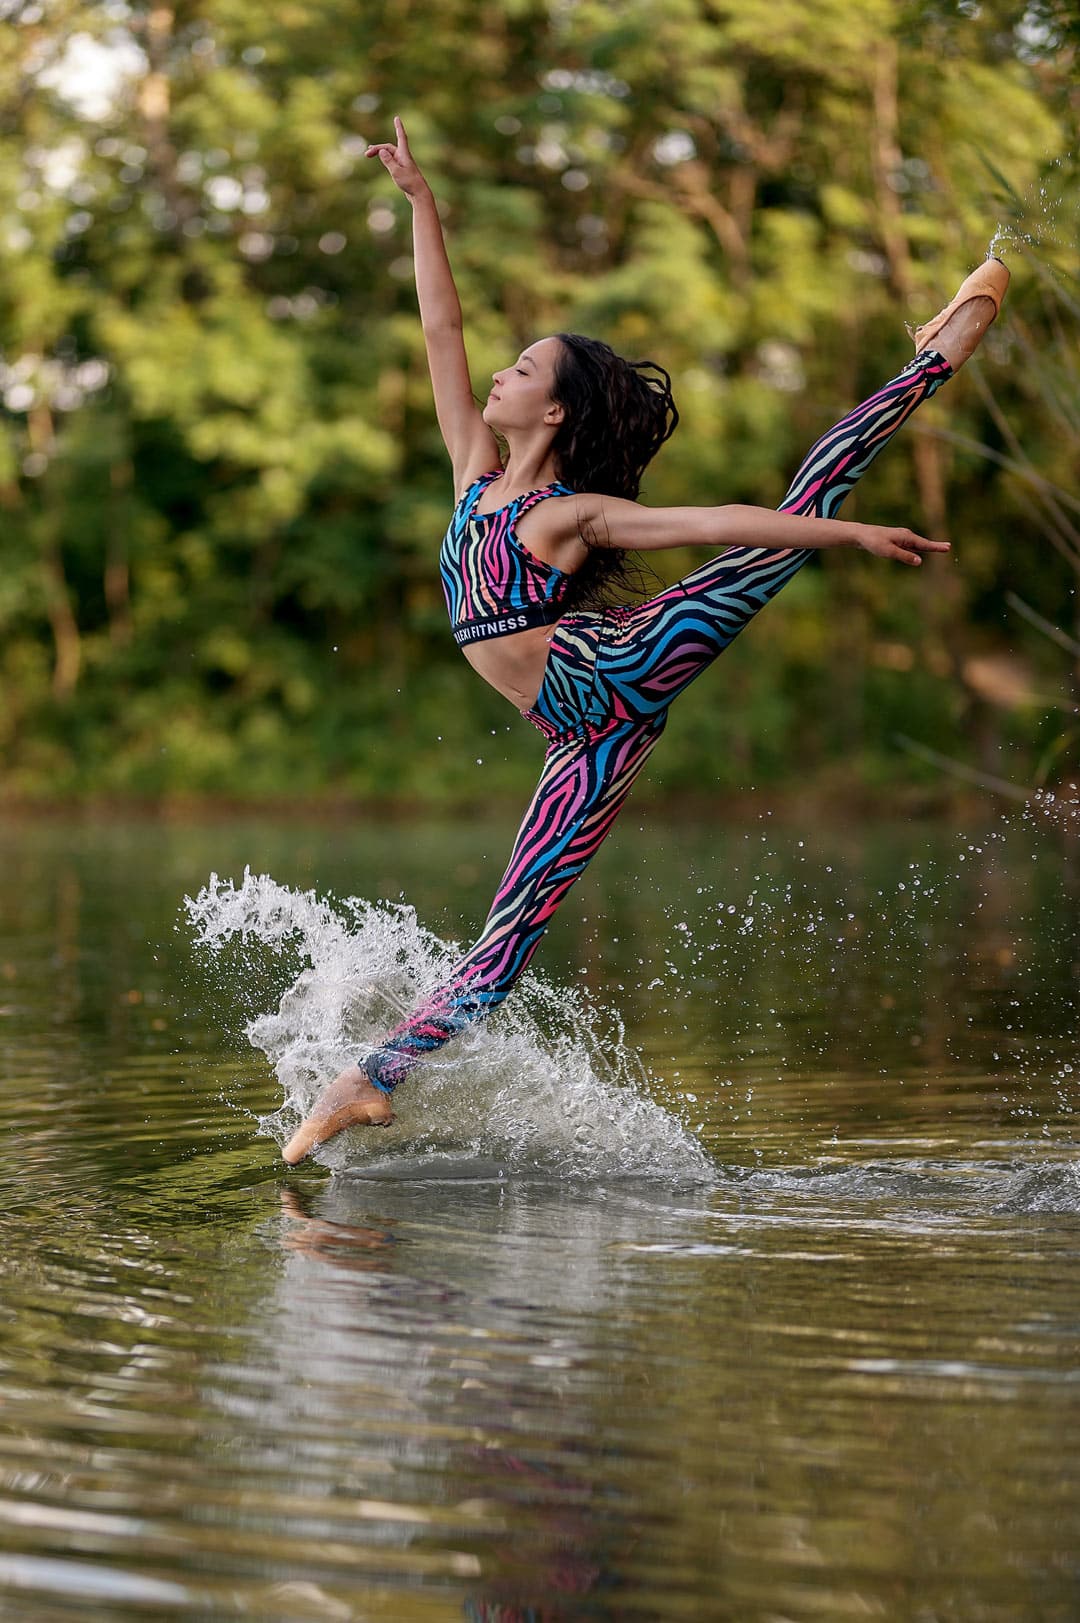 Show Your Stripes Tights from Flexi Lexi Fitness. High-Rise Pocket Legging - Made from recycled water bottles